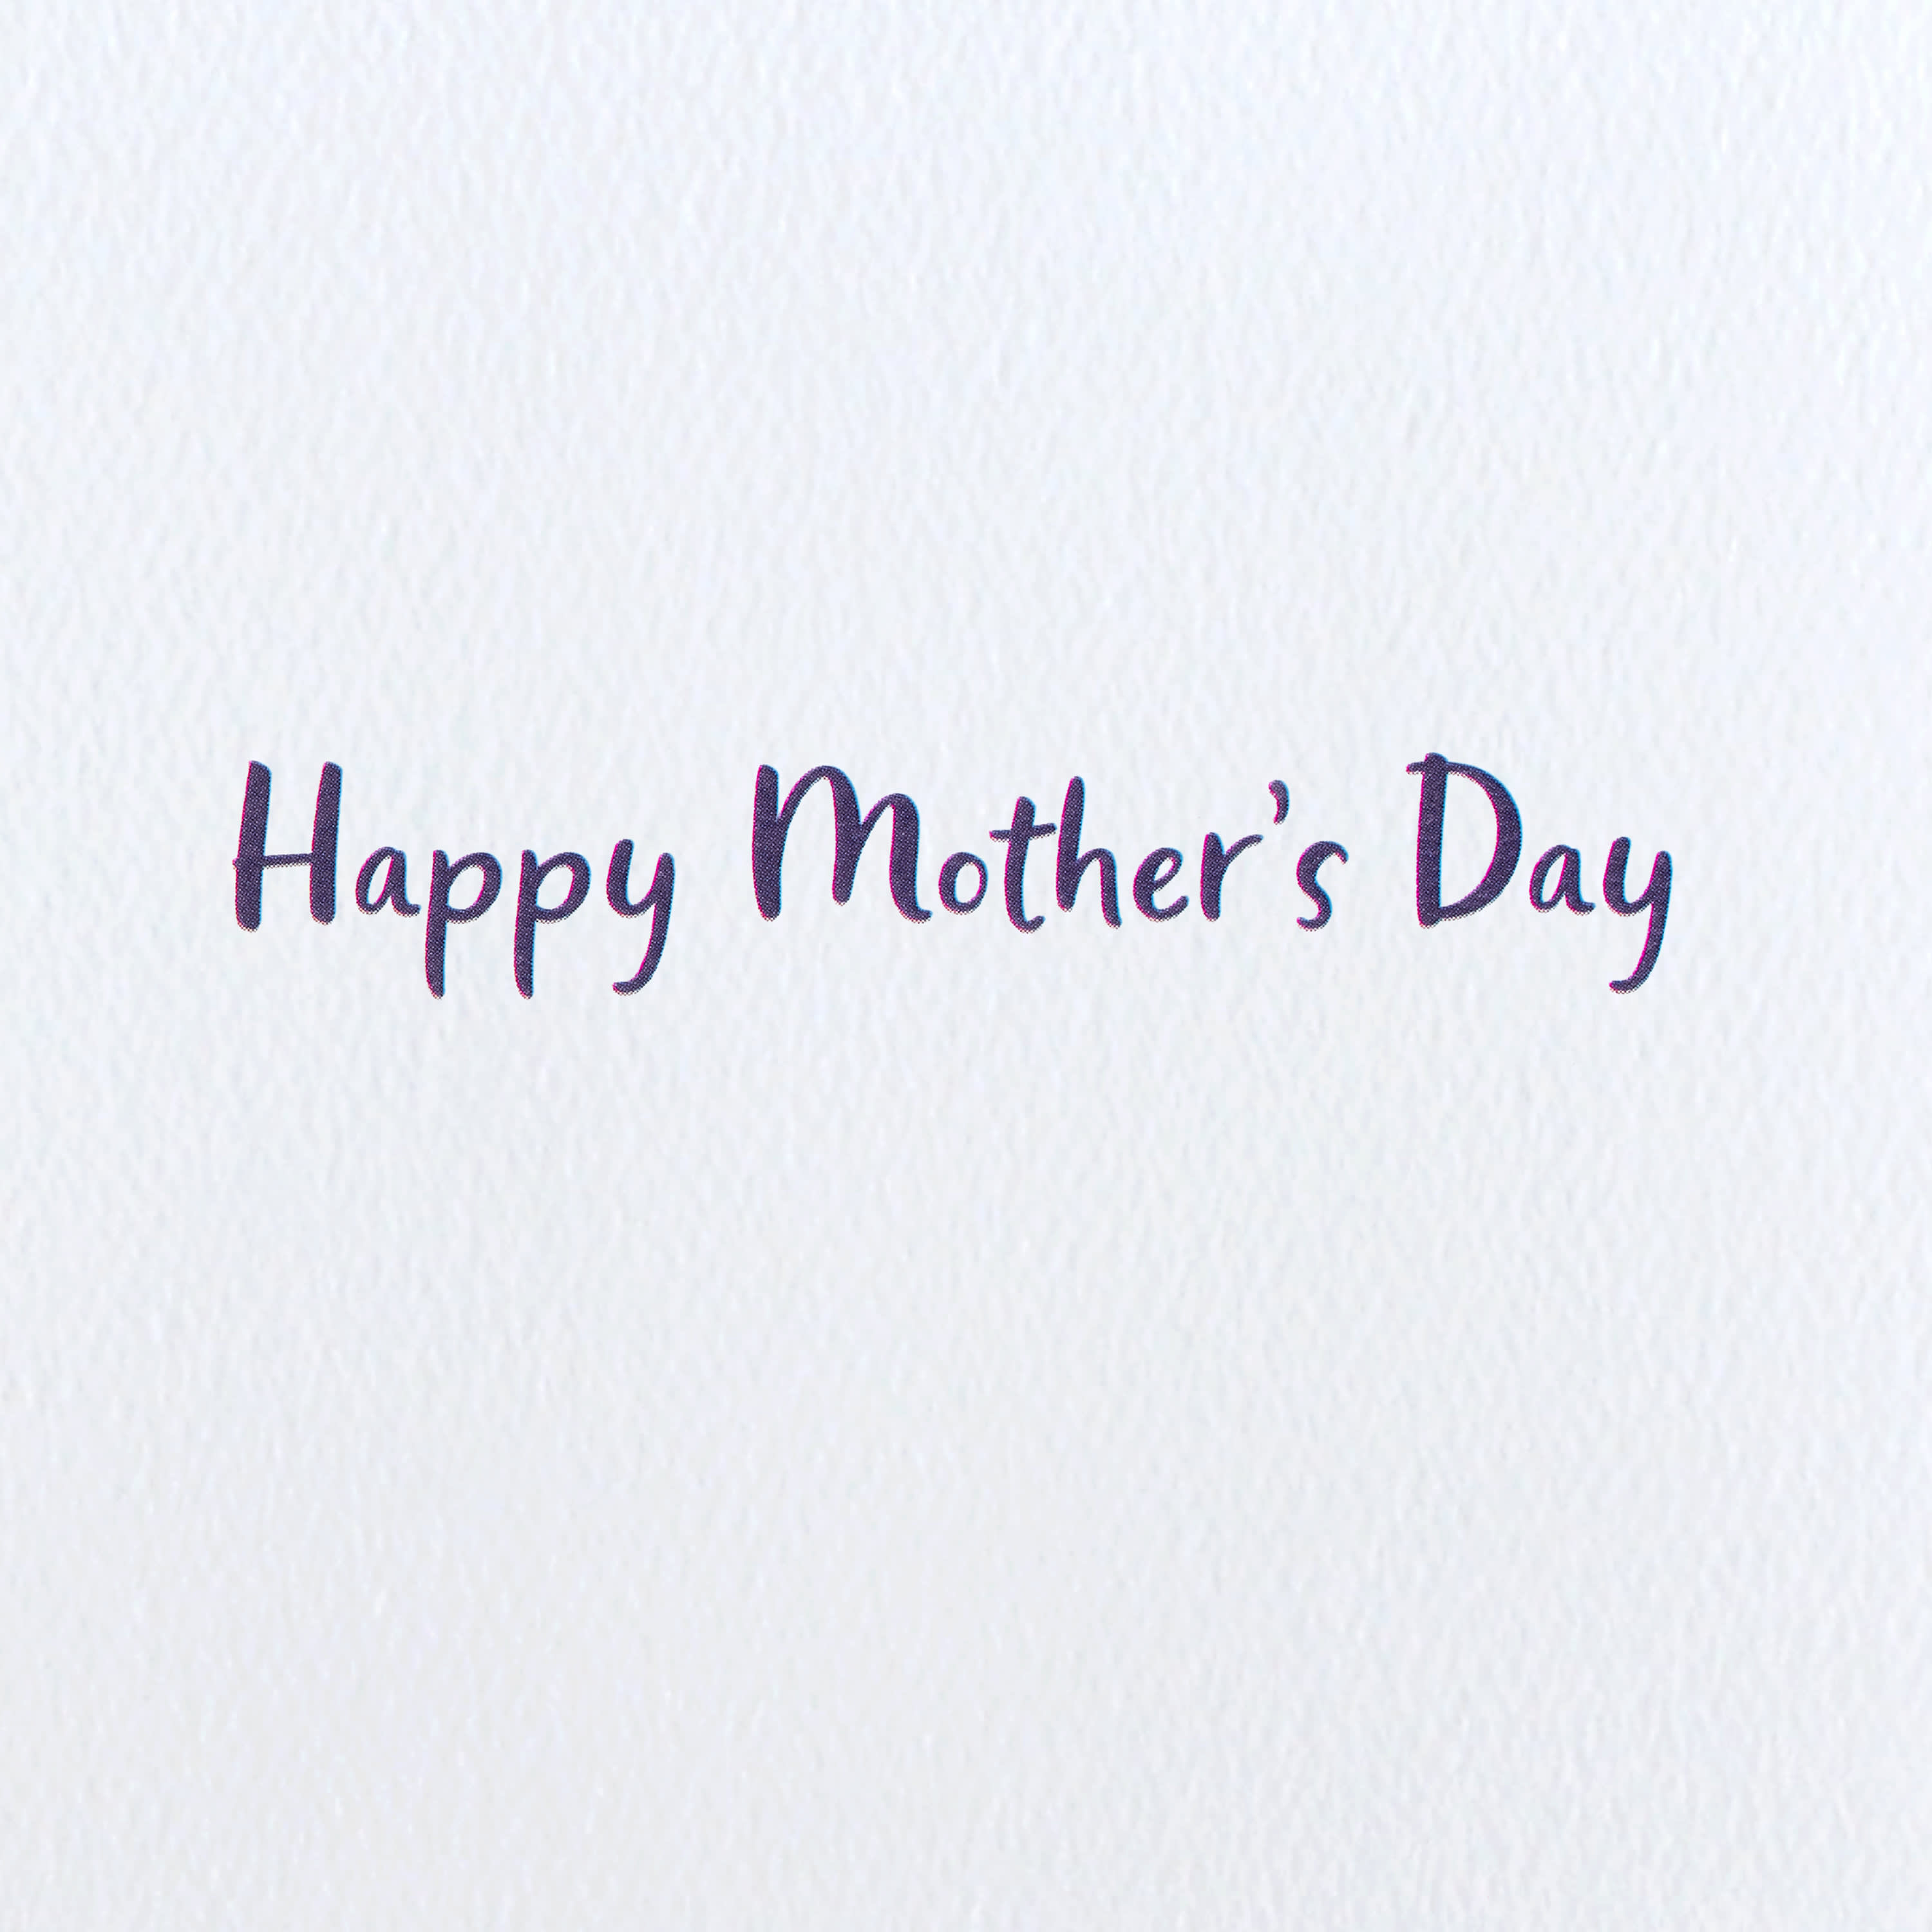 Mother's Day Card from the Dog image